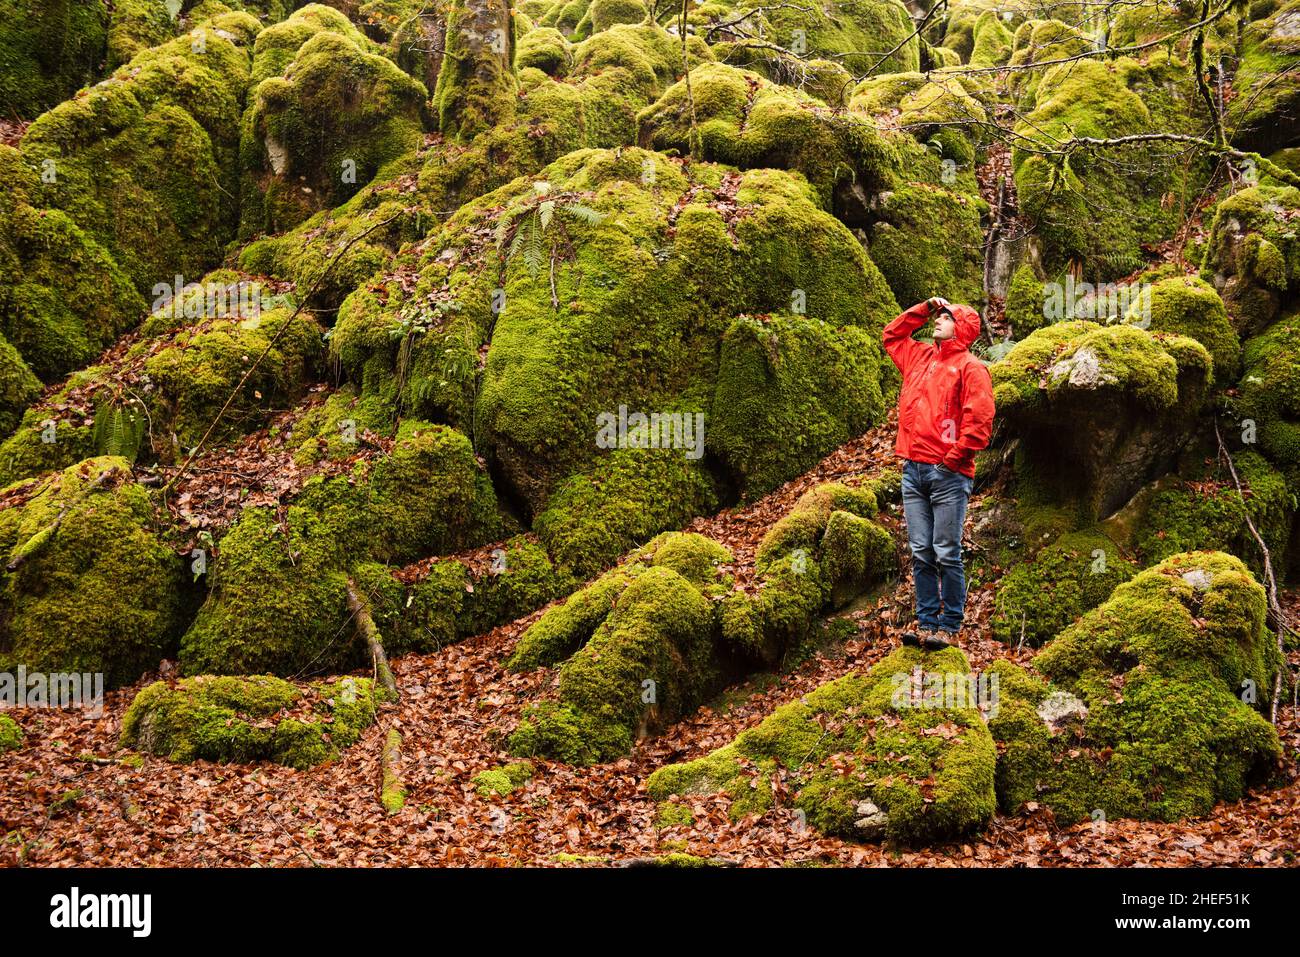 Man wearing a red jacket in a green mossy forest. Stock Photo